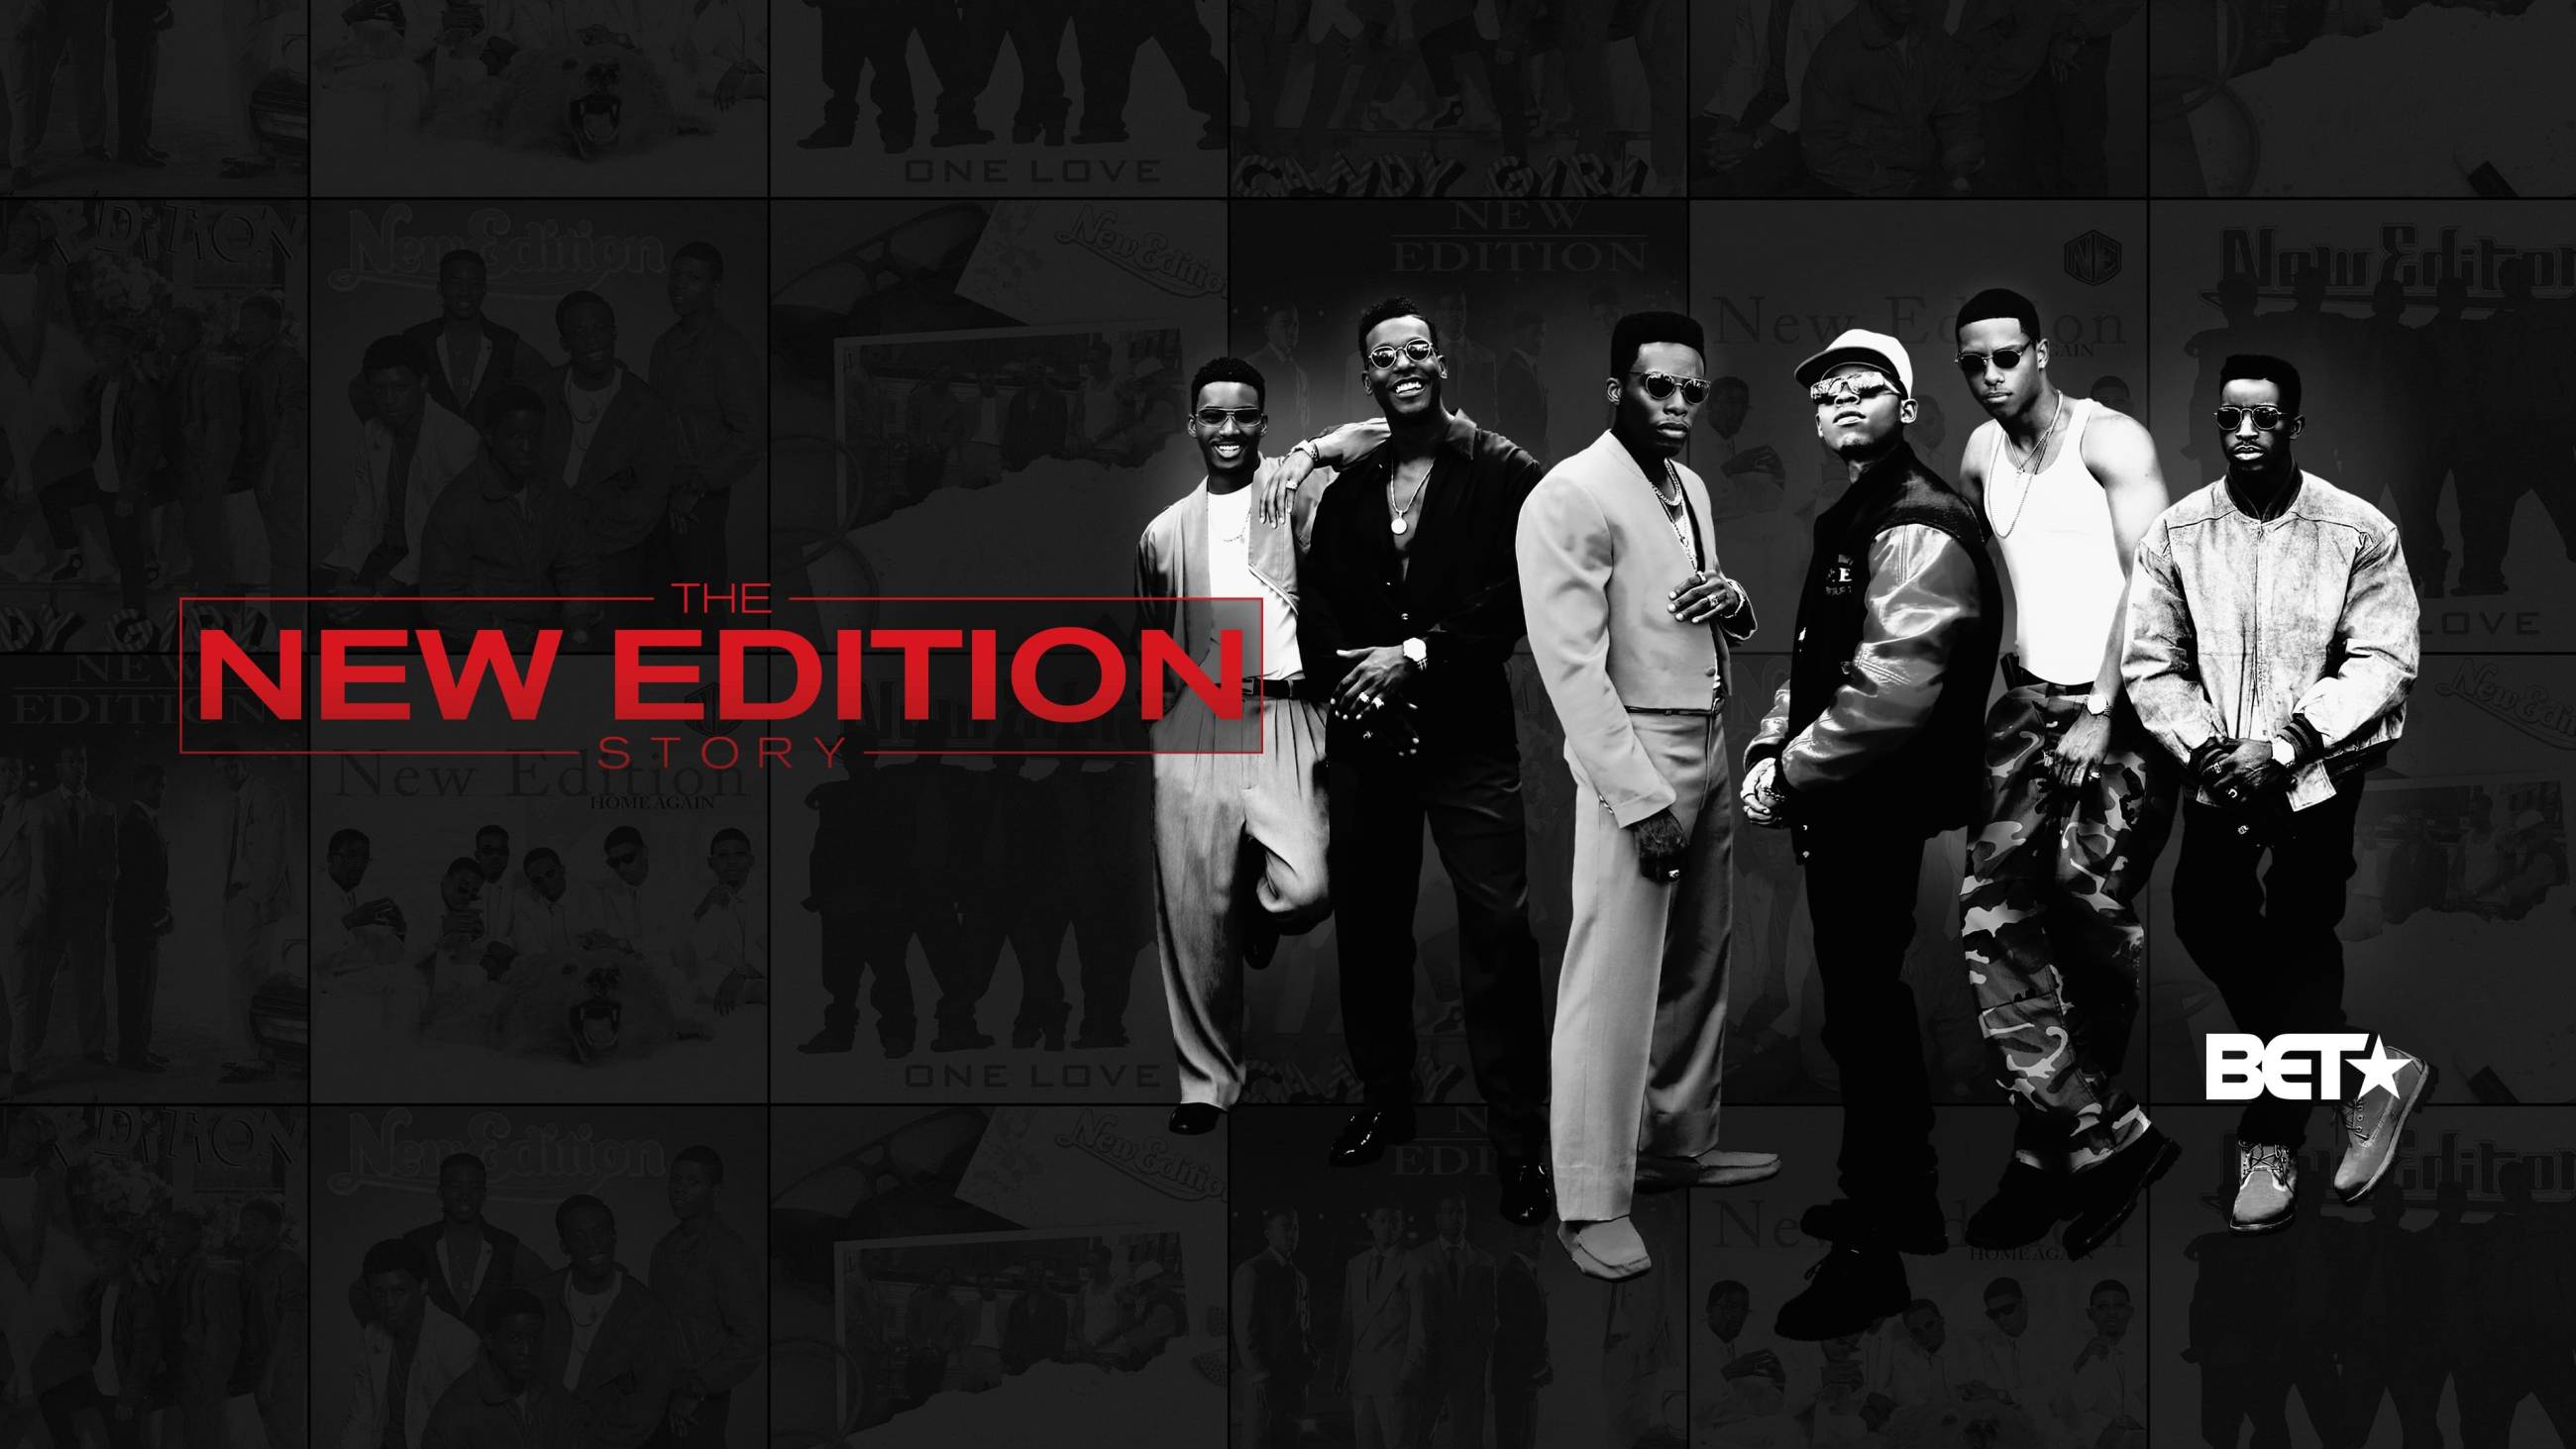 Cubierta de The New Edition Story